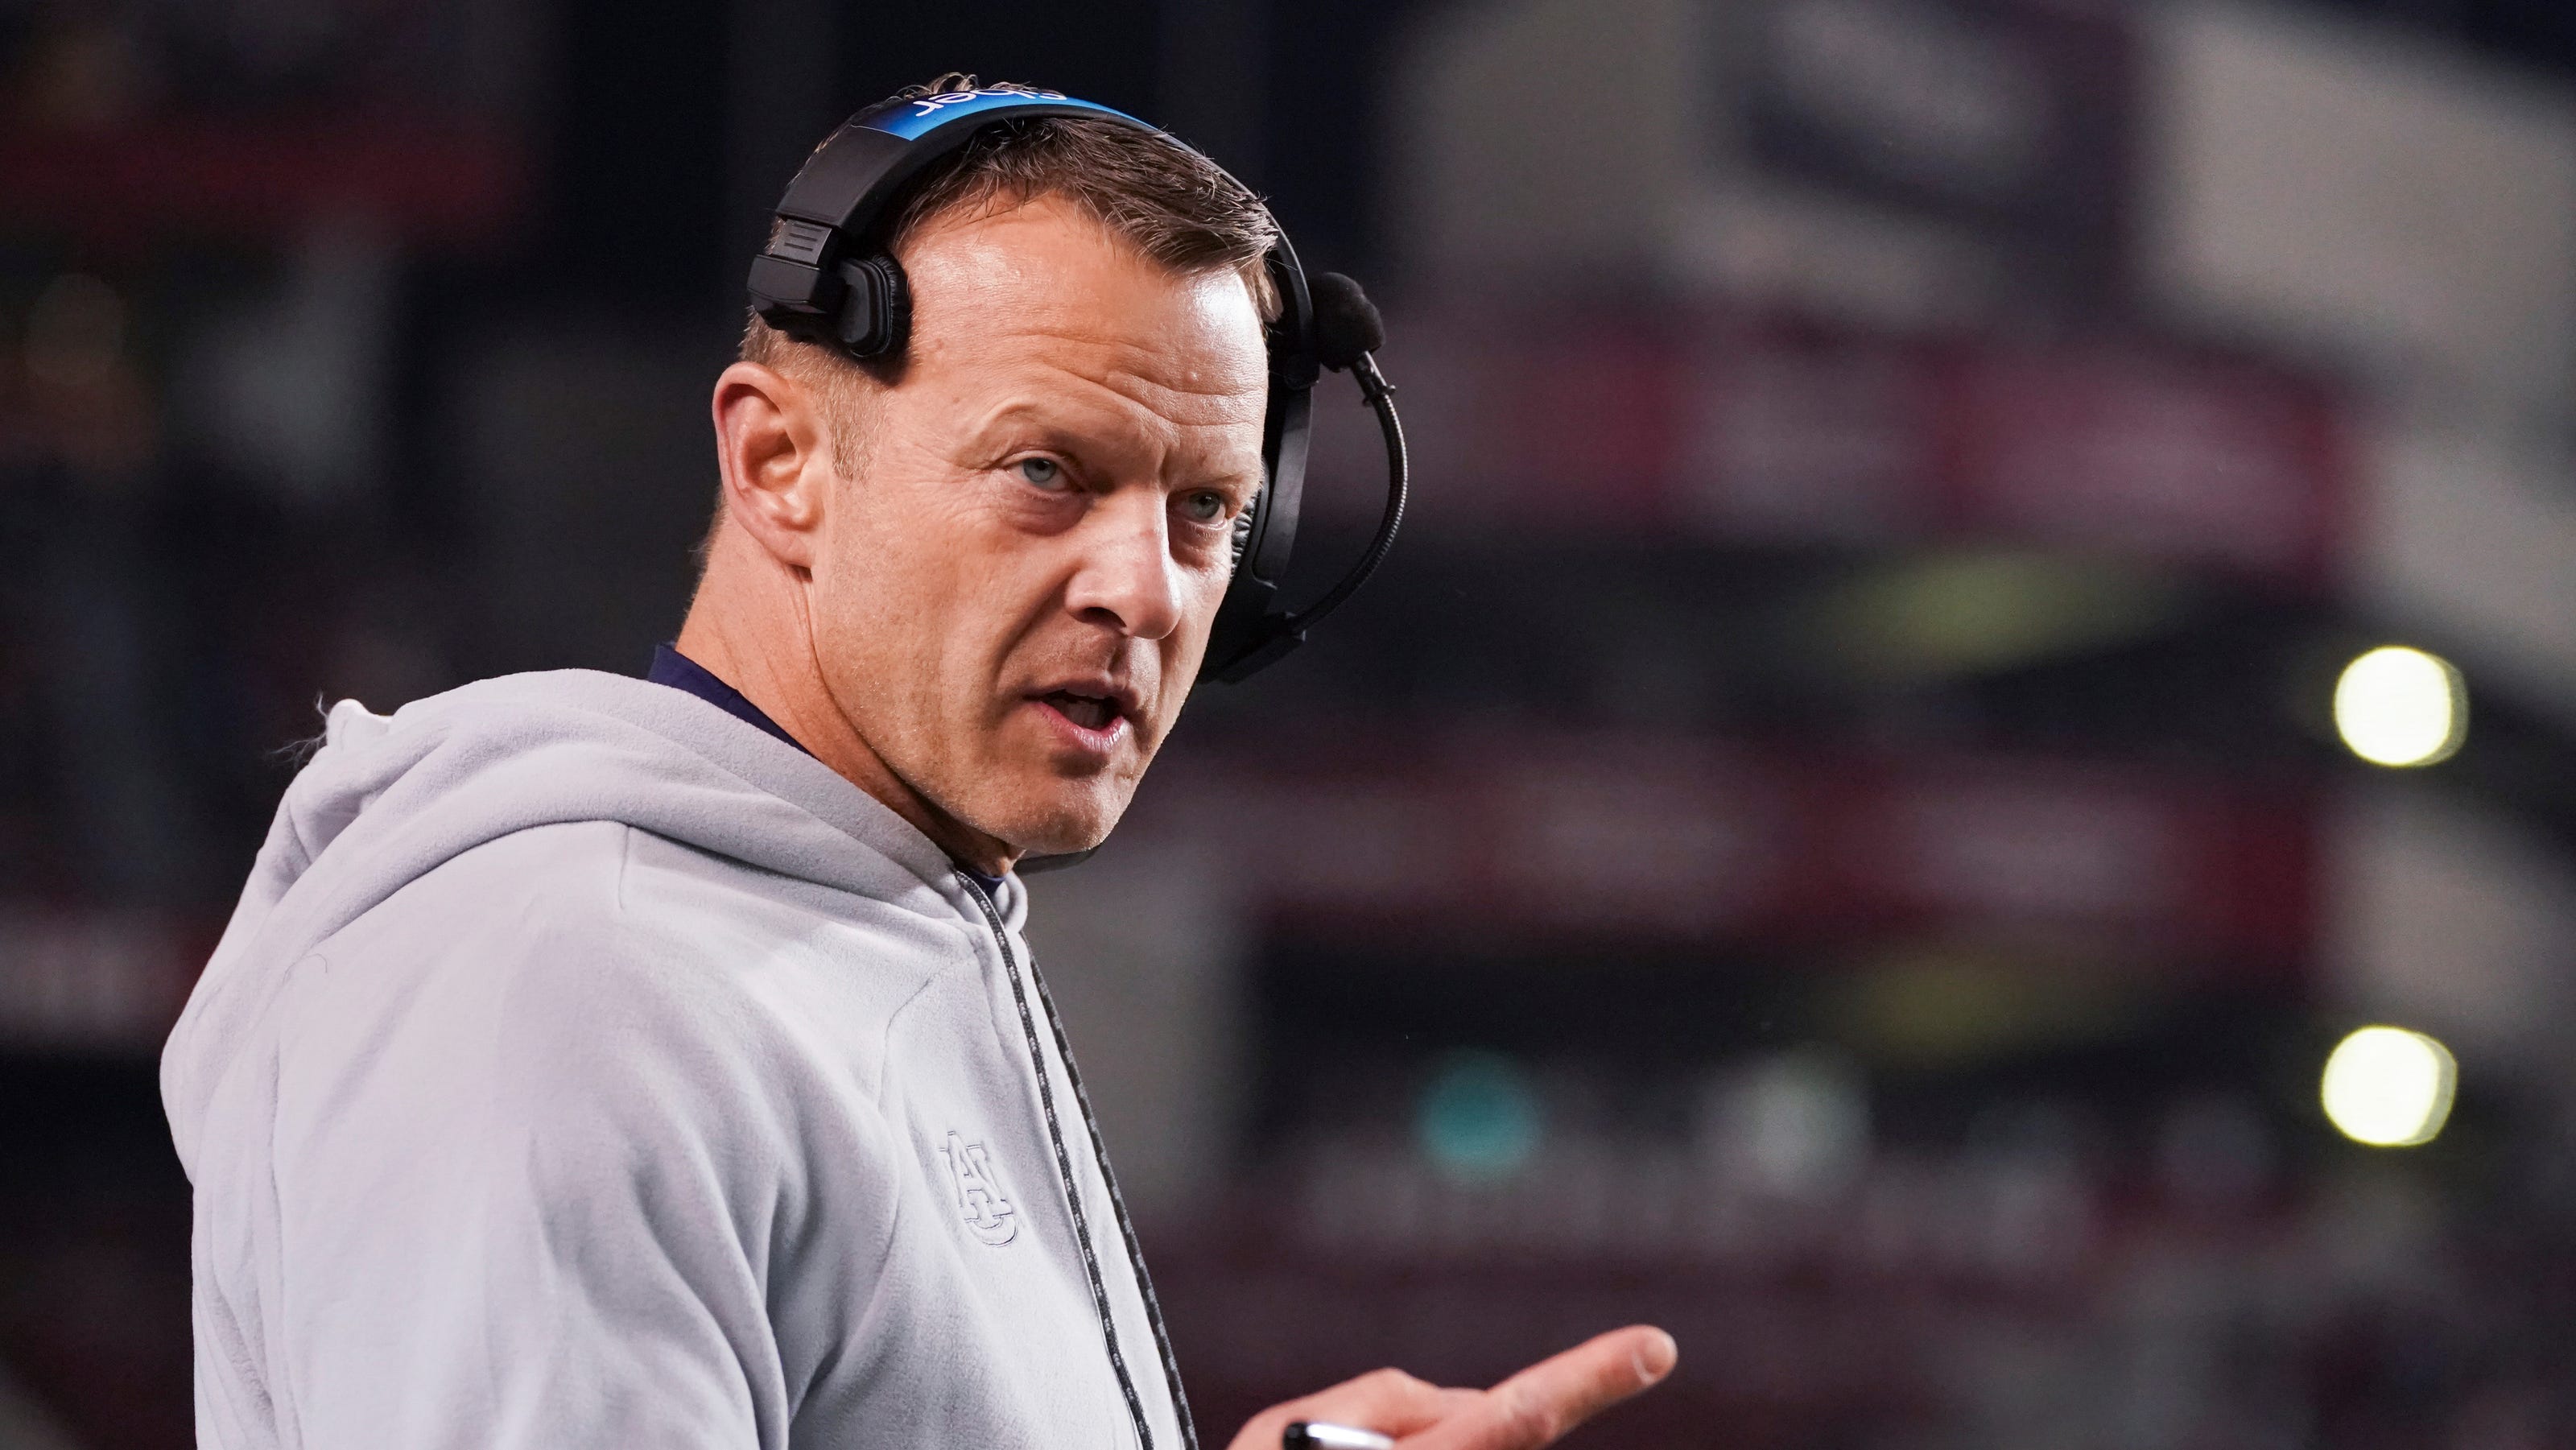 If Auburn fires Bryan Harsin after 2022 season, what is his buyout?